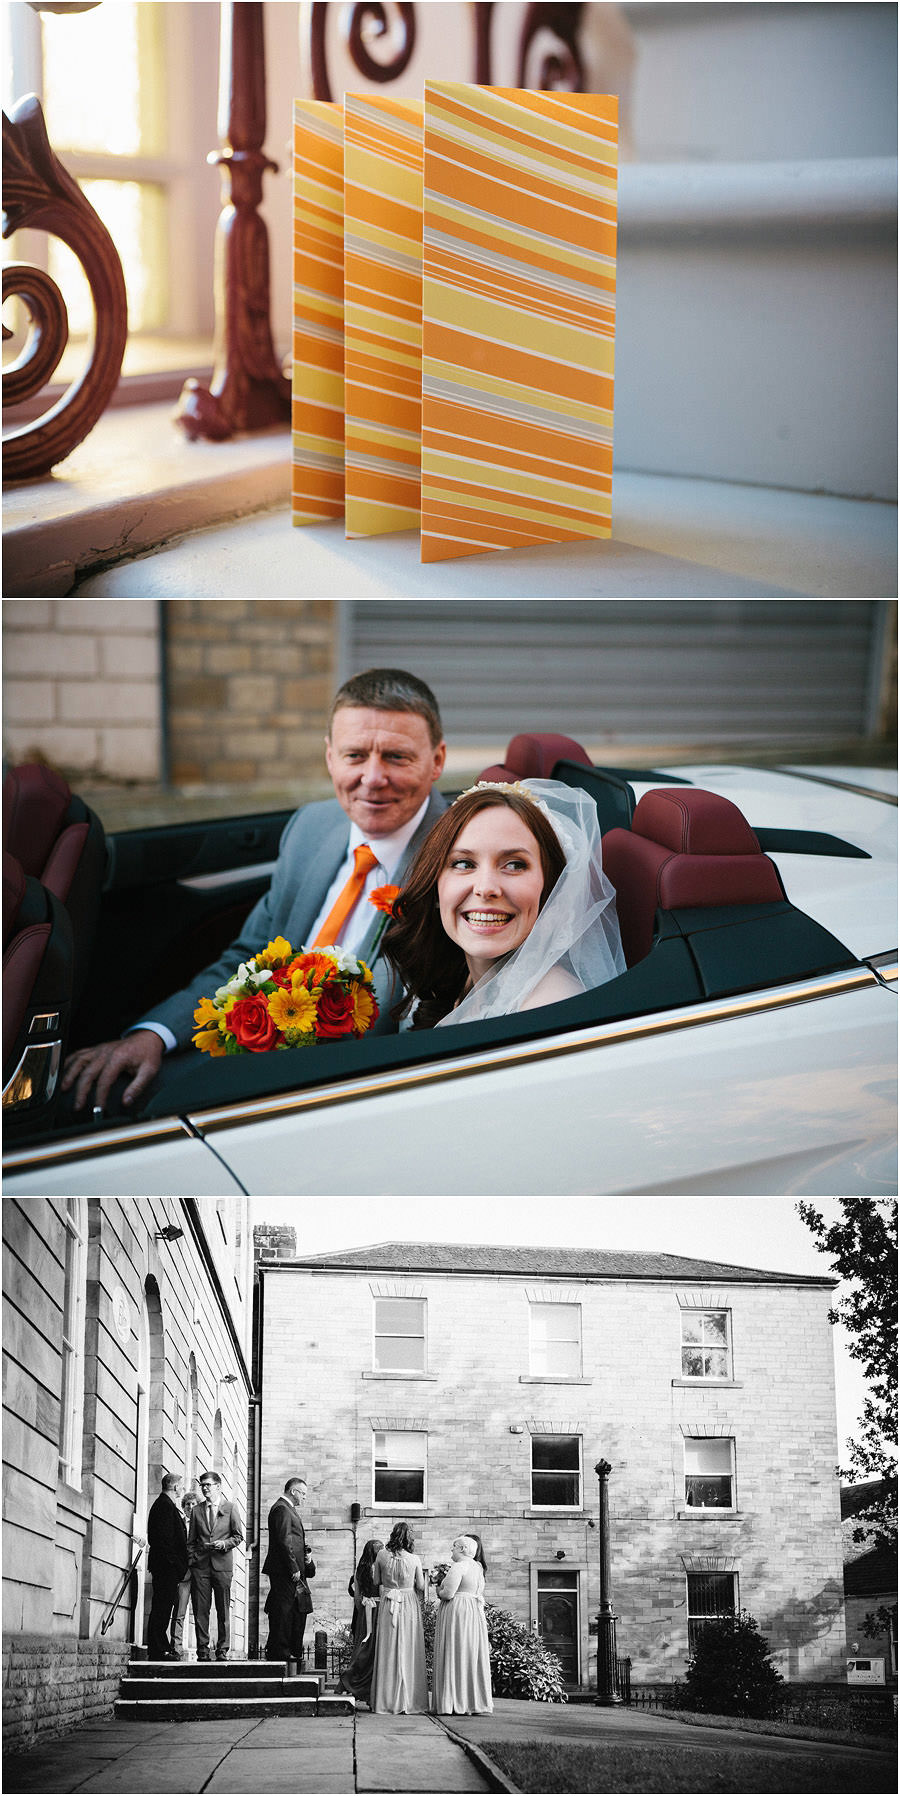 Jo and Fraser’s Waterford Park wedding